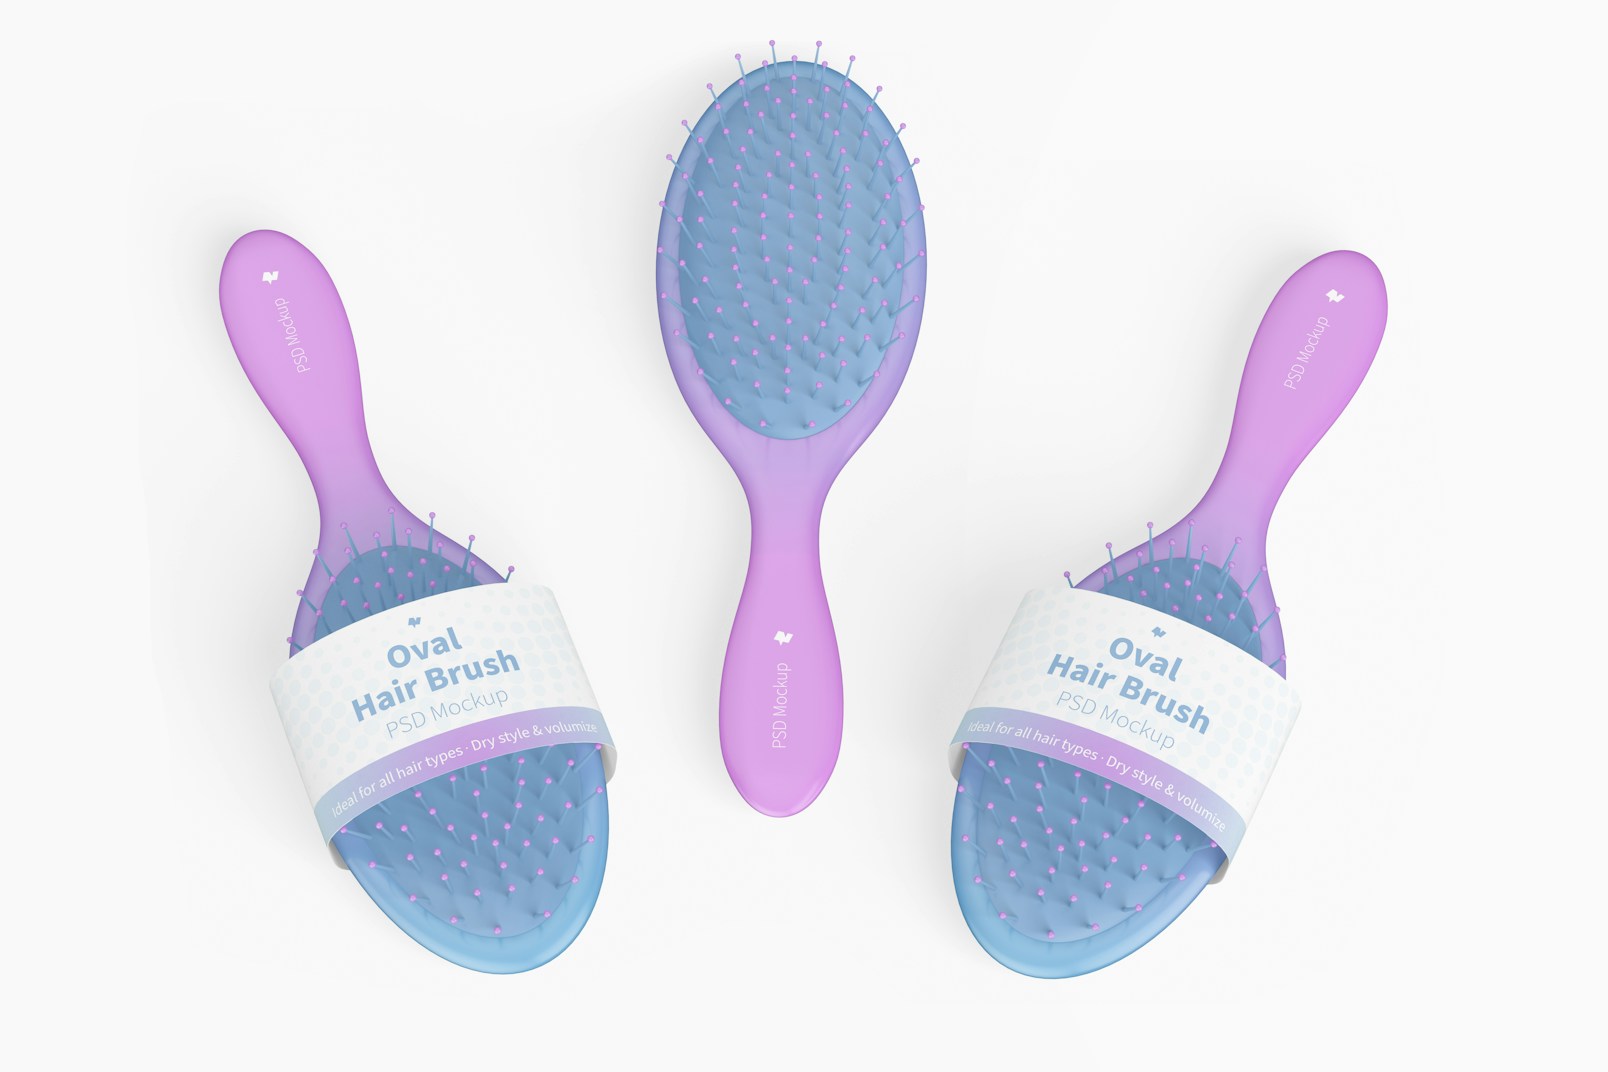 Oval Hair Brushes with Label Mockup